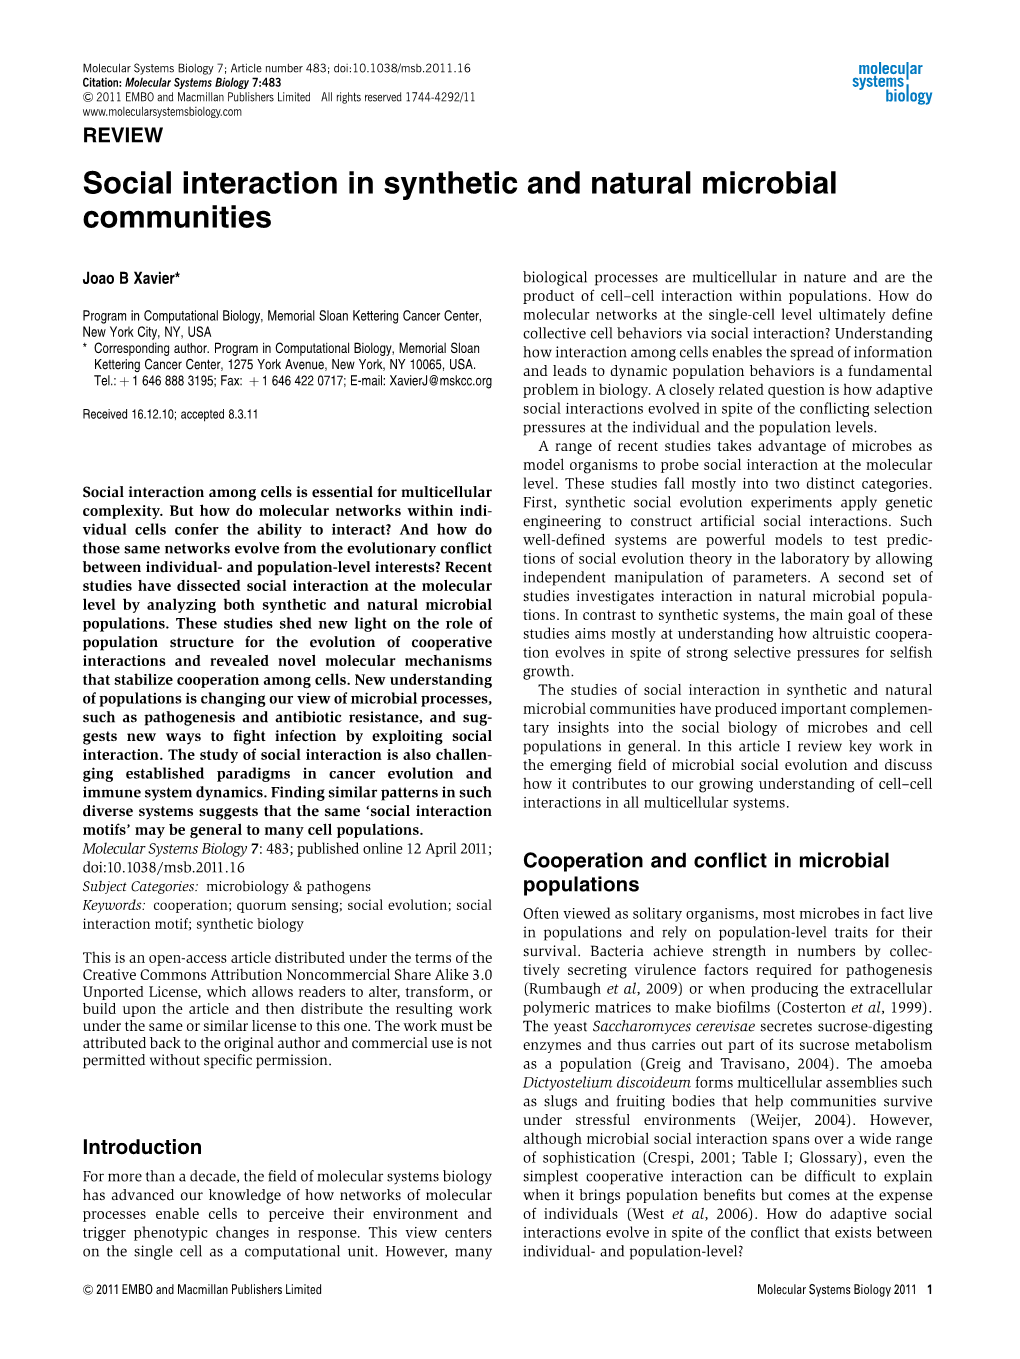 Social Interaction in Synthetic and Natural Microbial Communities